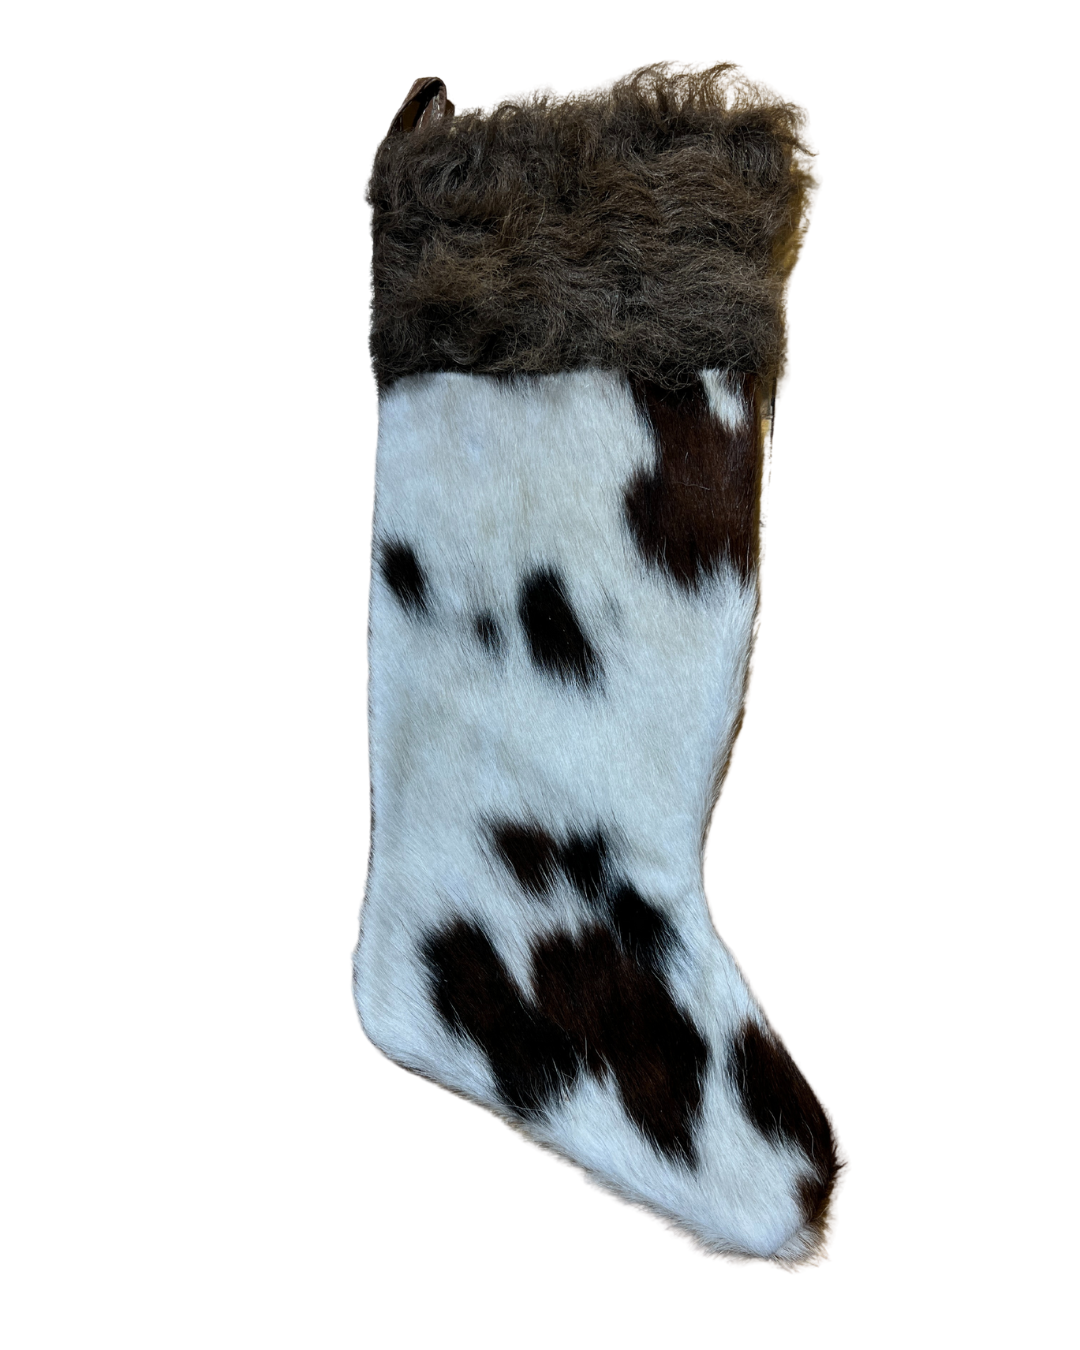 Cowhide Christmas Stocking - Black & White with Bison Hair - Large